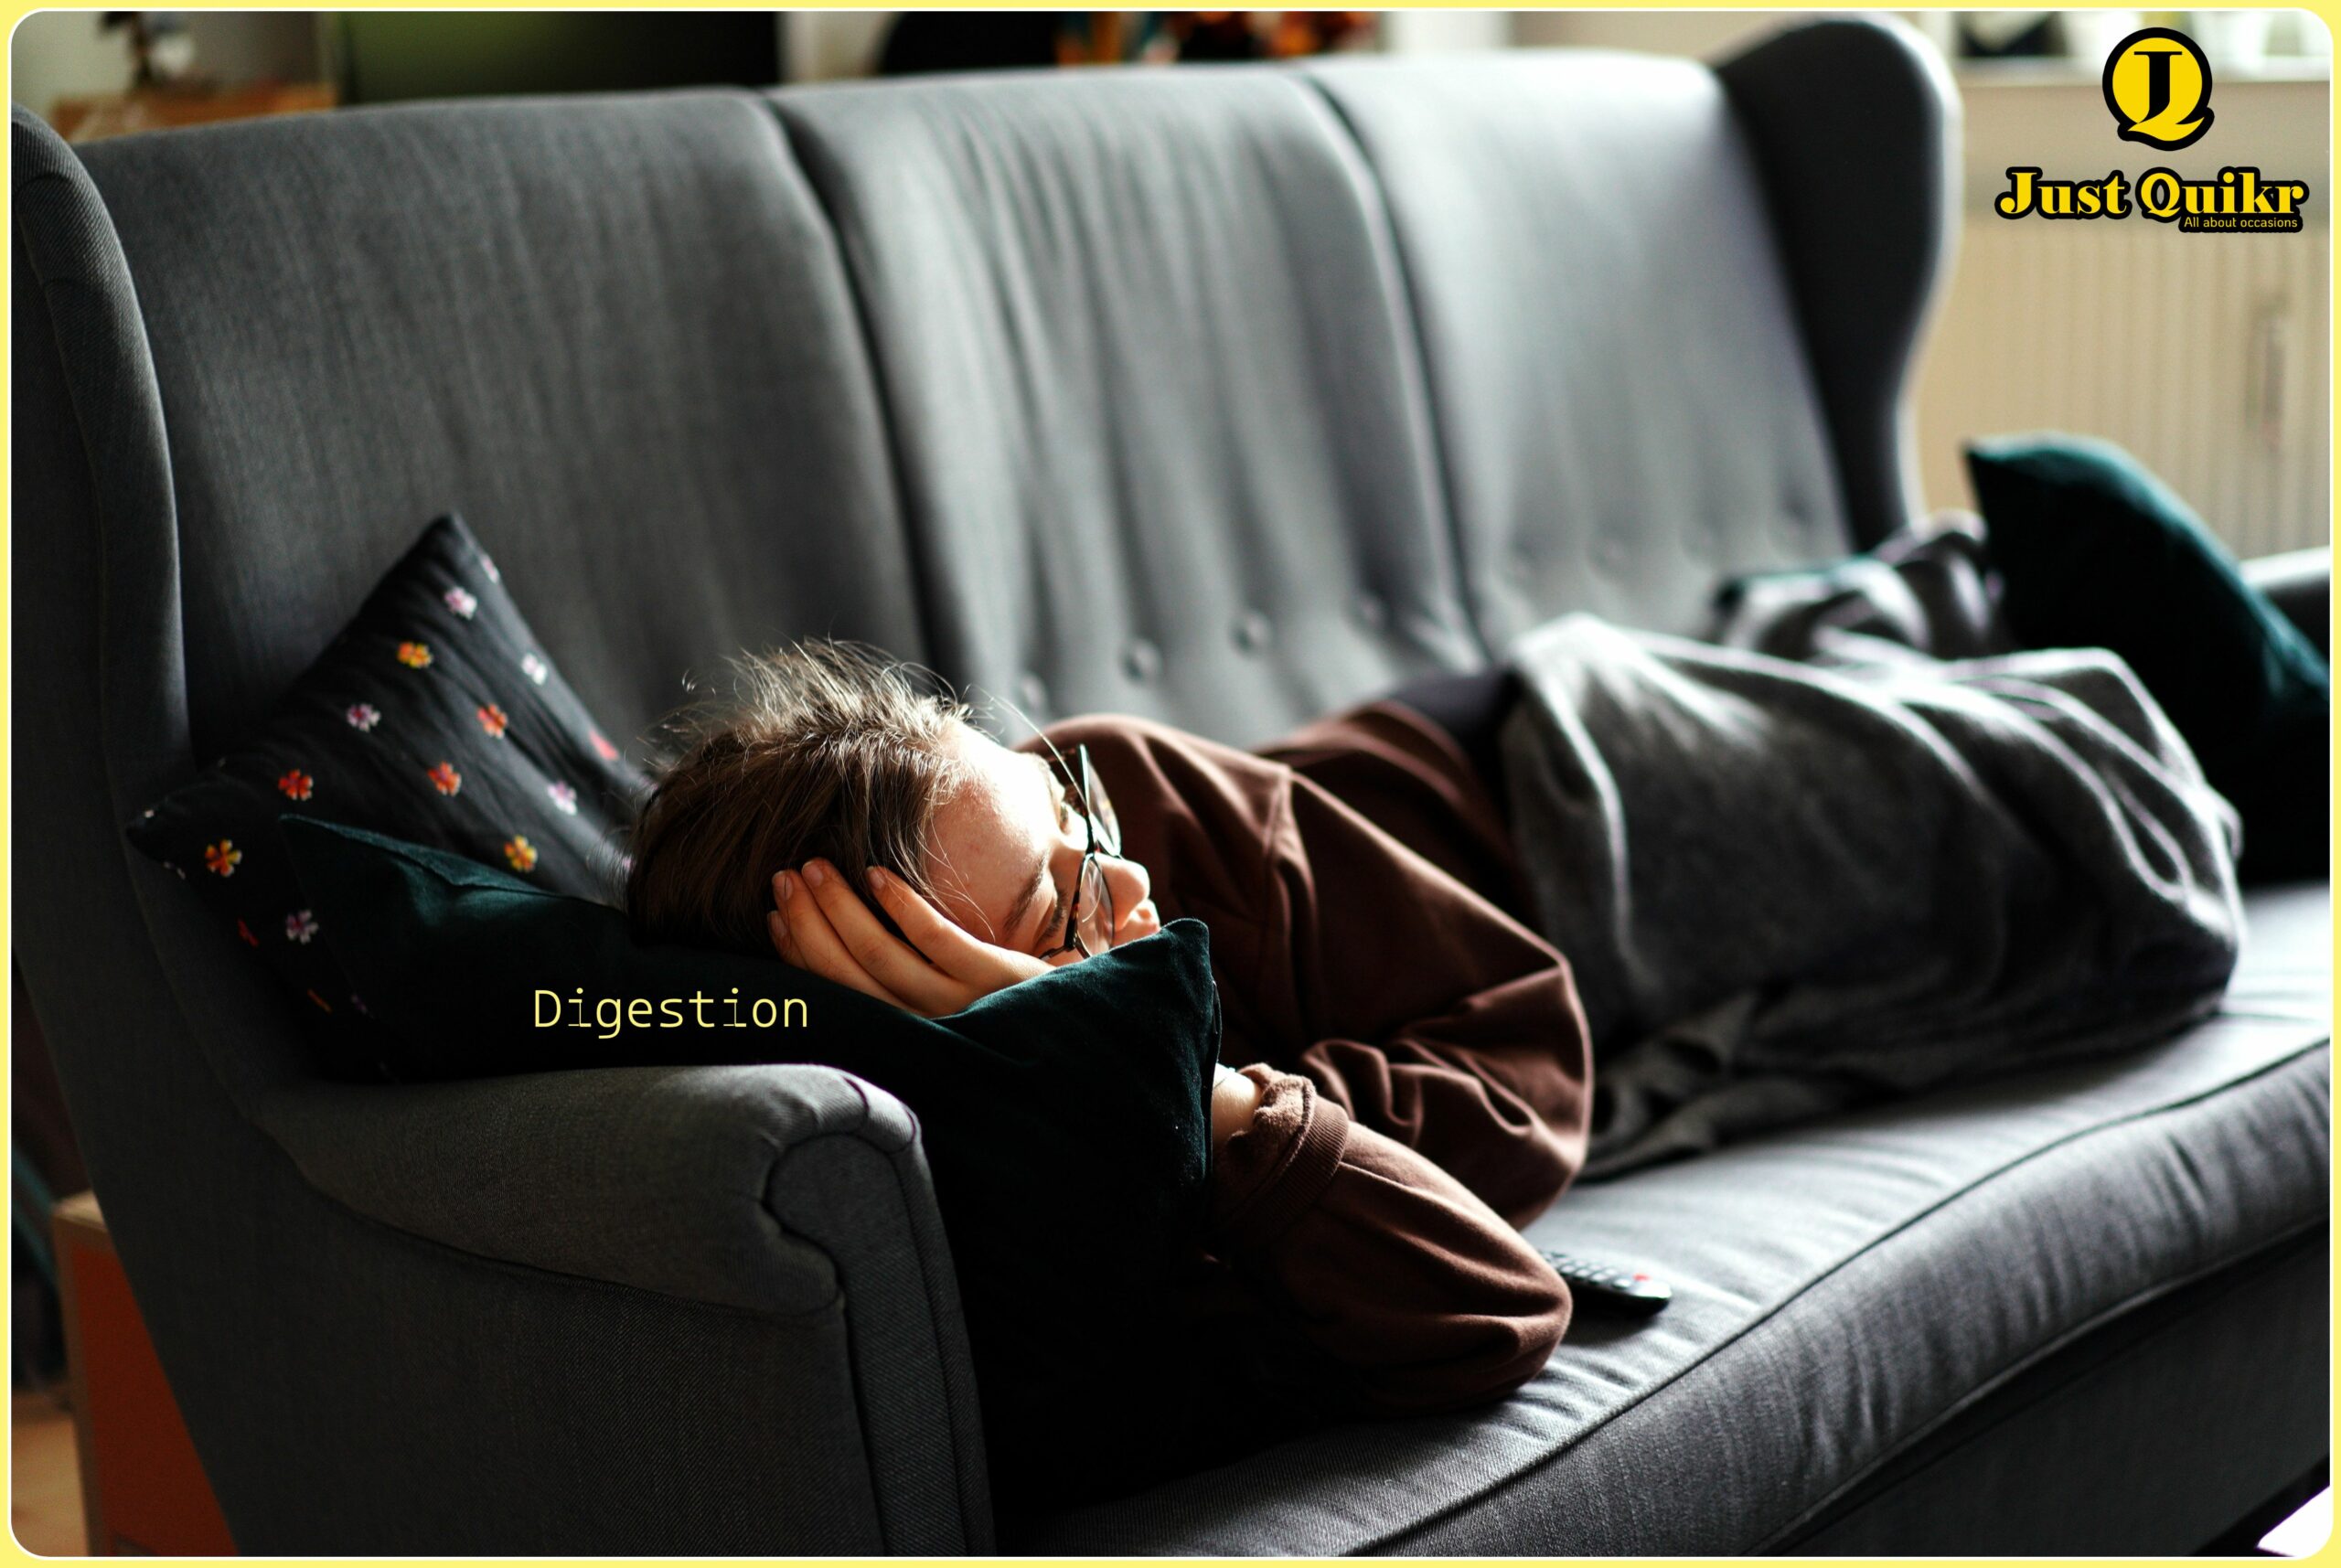 Good Sleeping Position for Digestion